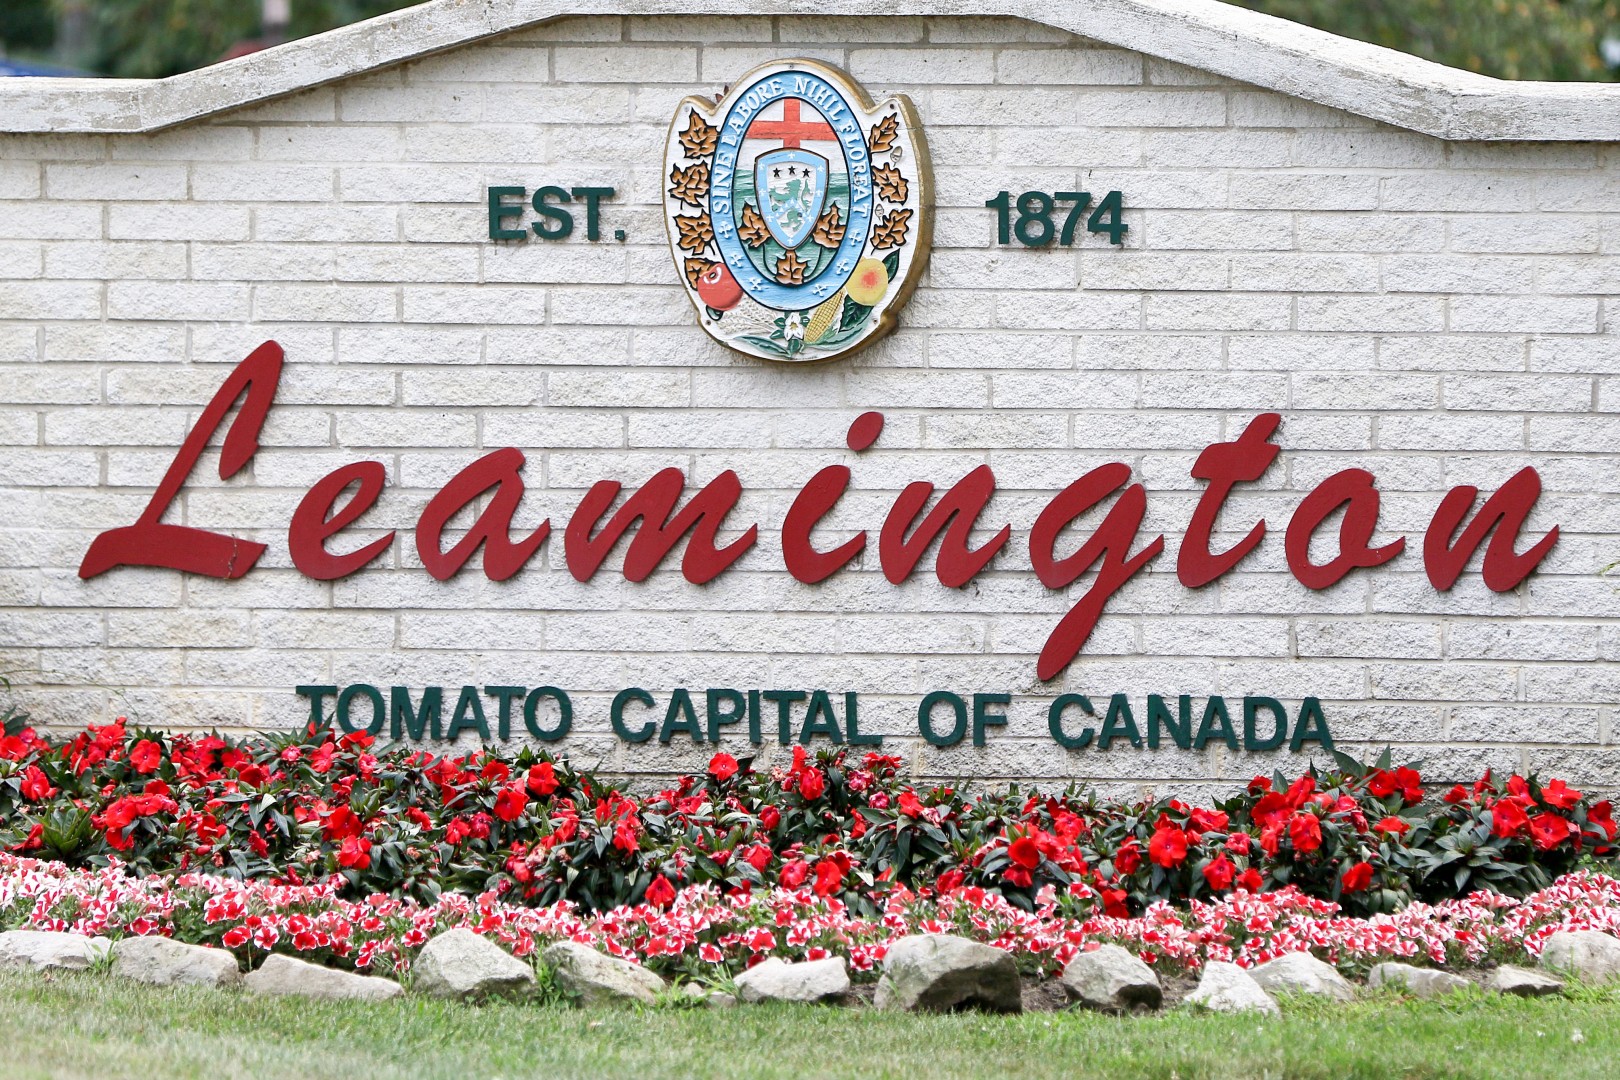 Great Events Happening in Leamington This Summer